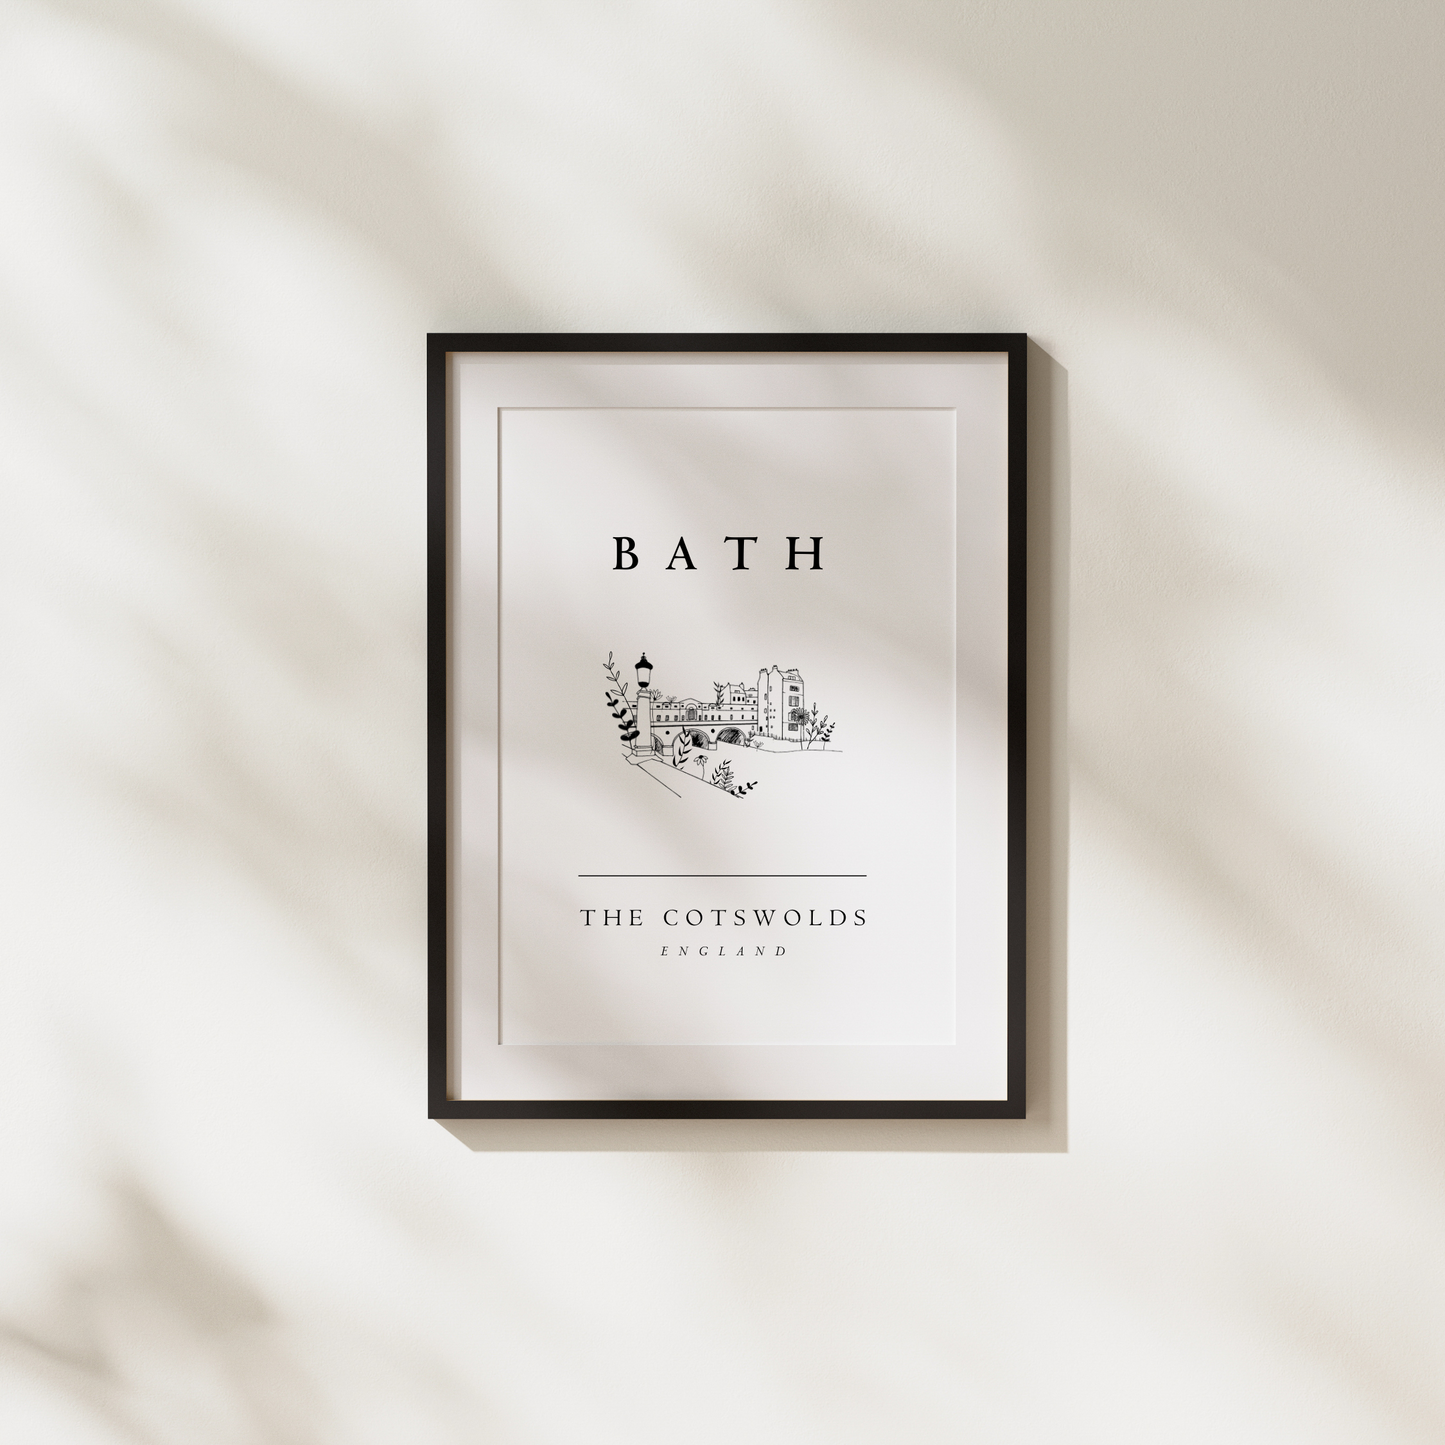 Bath | Cotswold Town Illustration | A4 Print - The Cotswold Illustrated Company